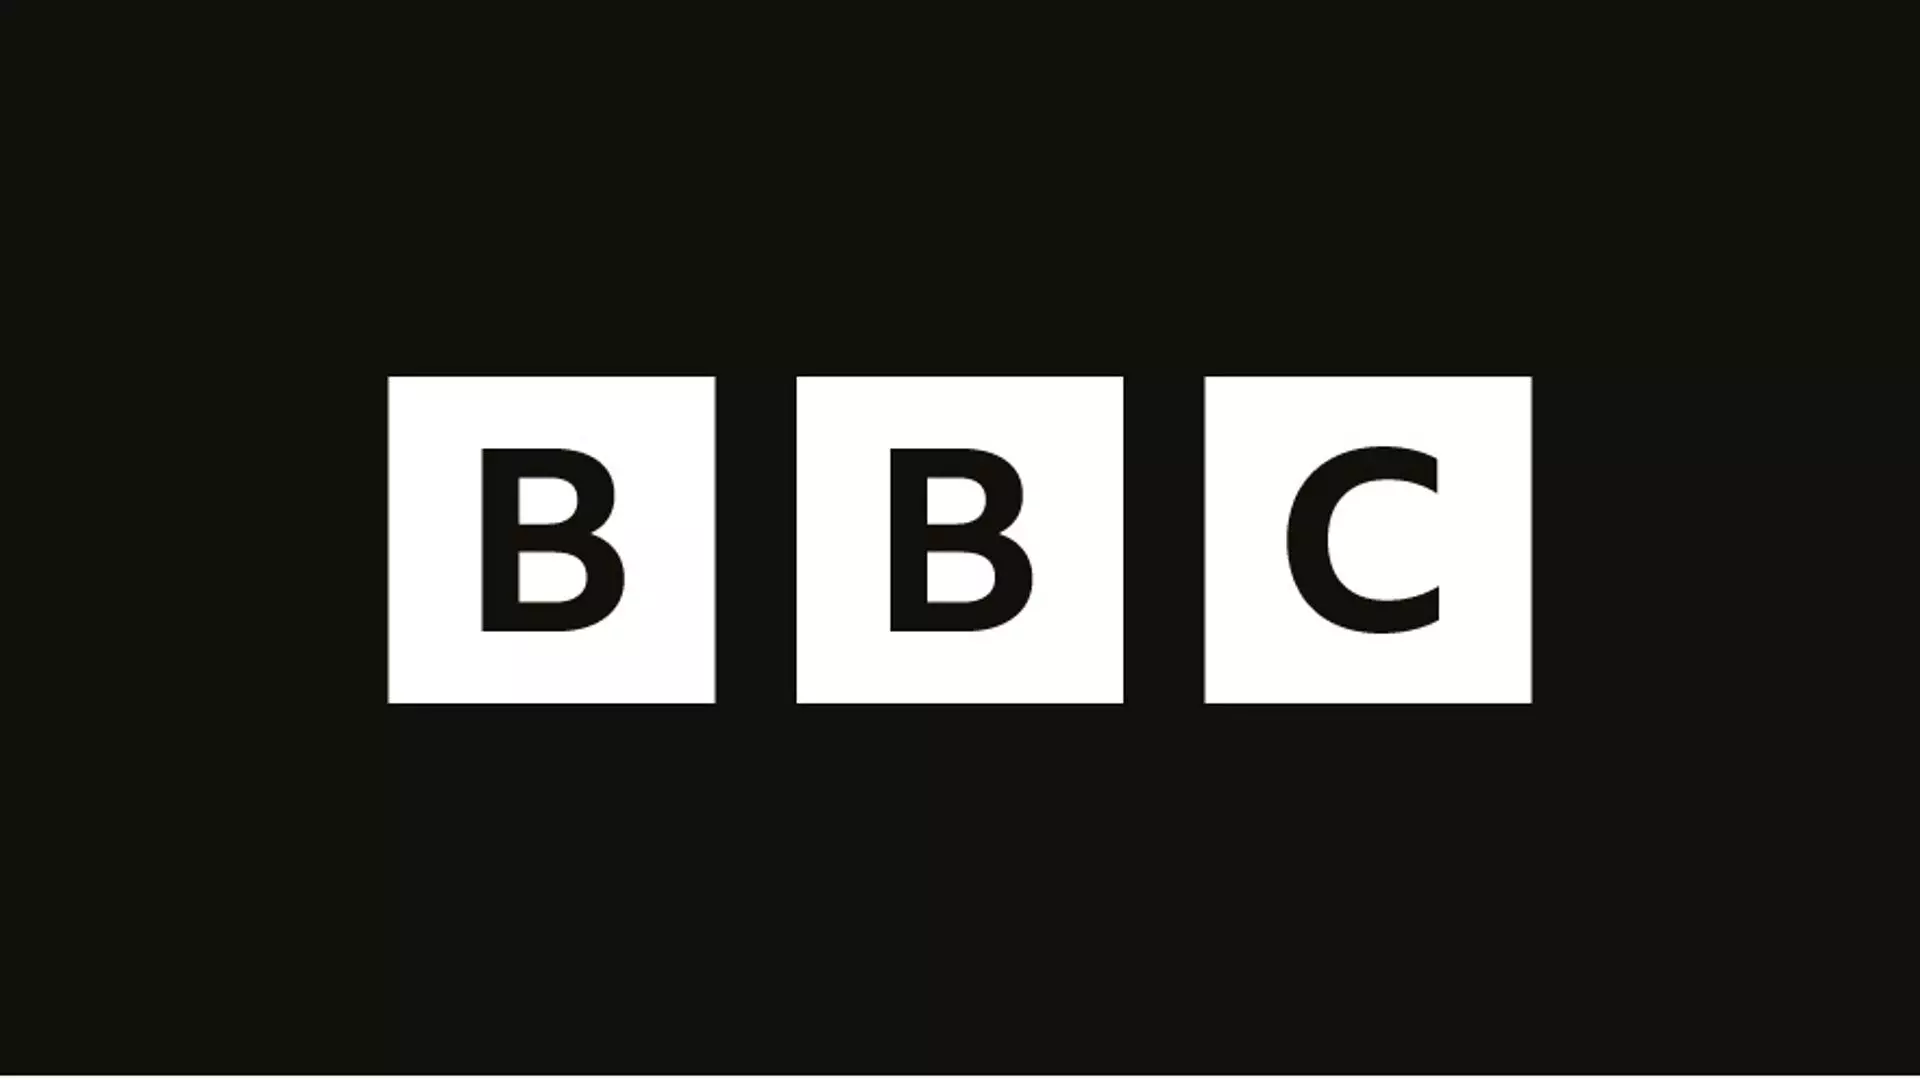 Supreme Court dismisses plea seeking complete ban on BBC from operating in India